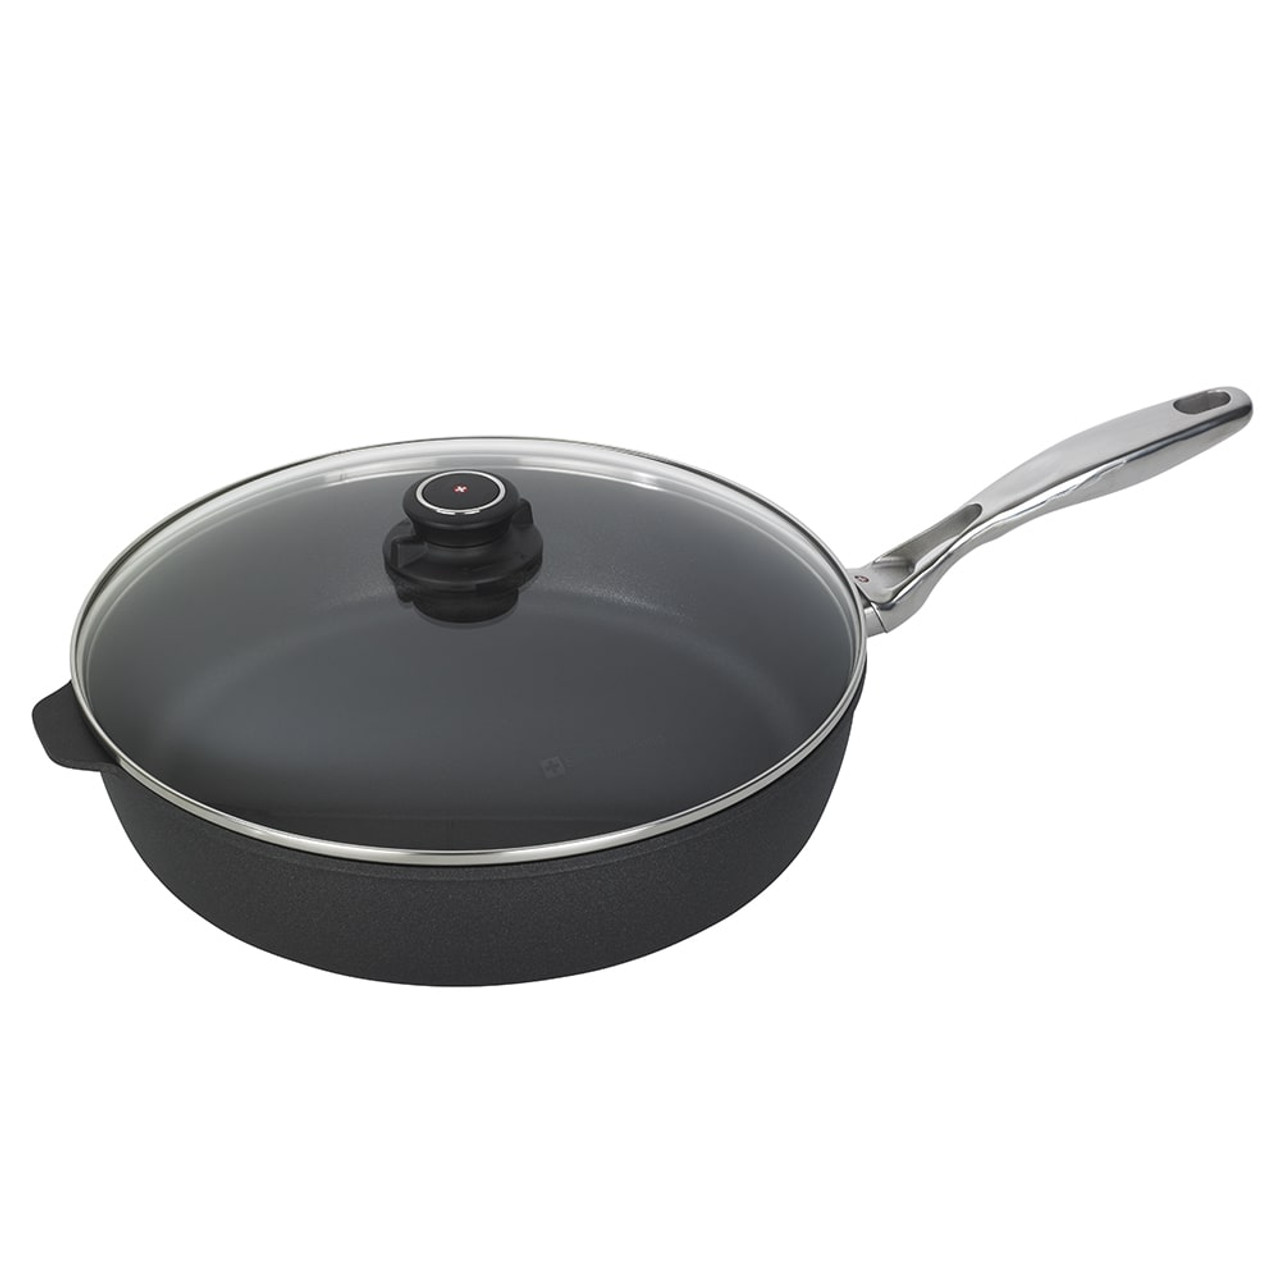 https://cdn11.bigcommerce.com/s-hccytny0od/images/stencil/1280x1280/products/3620/12910/swiss-diamond-xd-nonstick-saute-pan-12in__72901.1601480992.jpg?c=2?imbypass=on